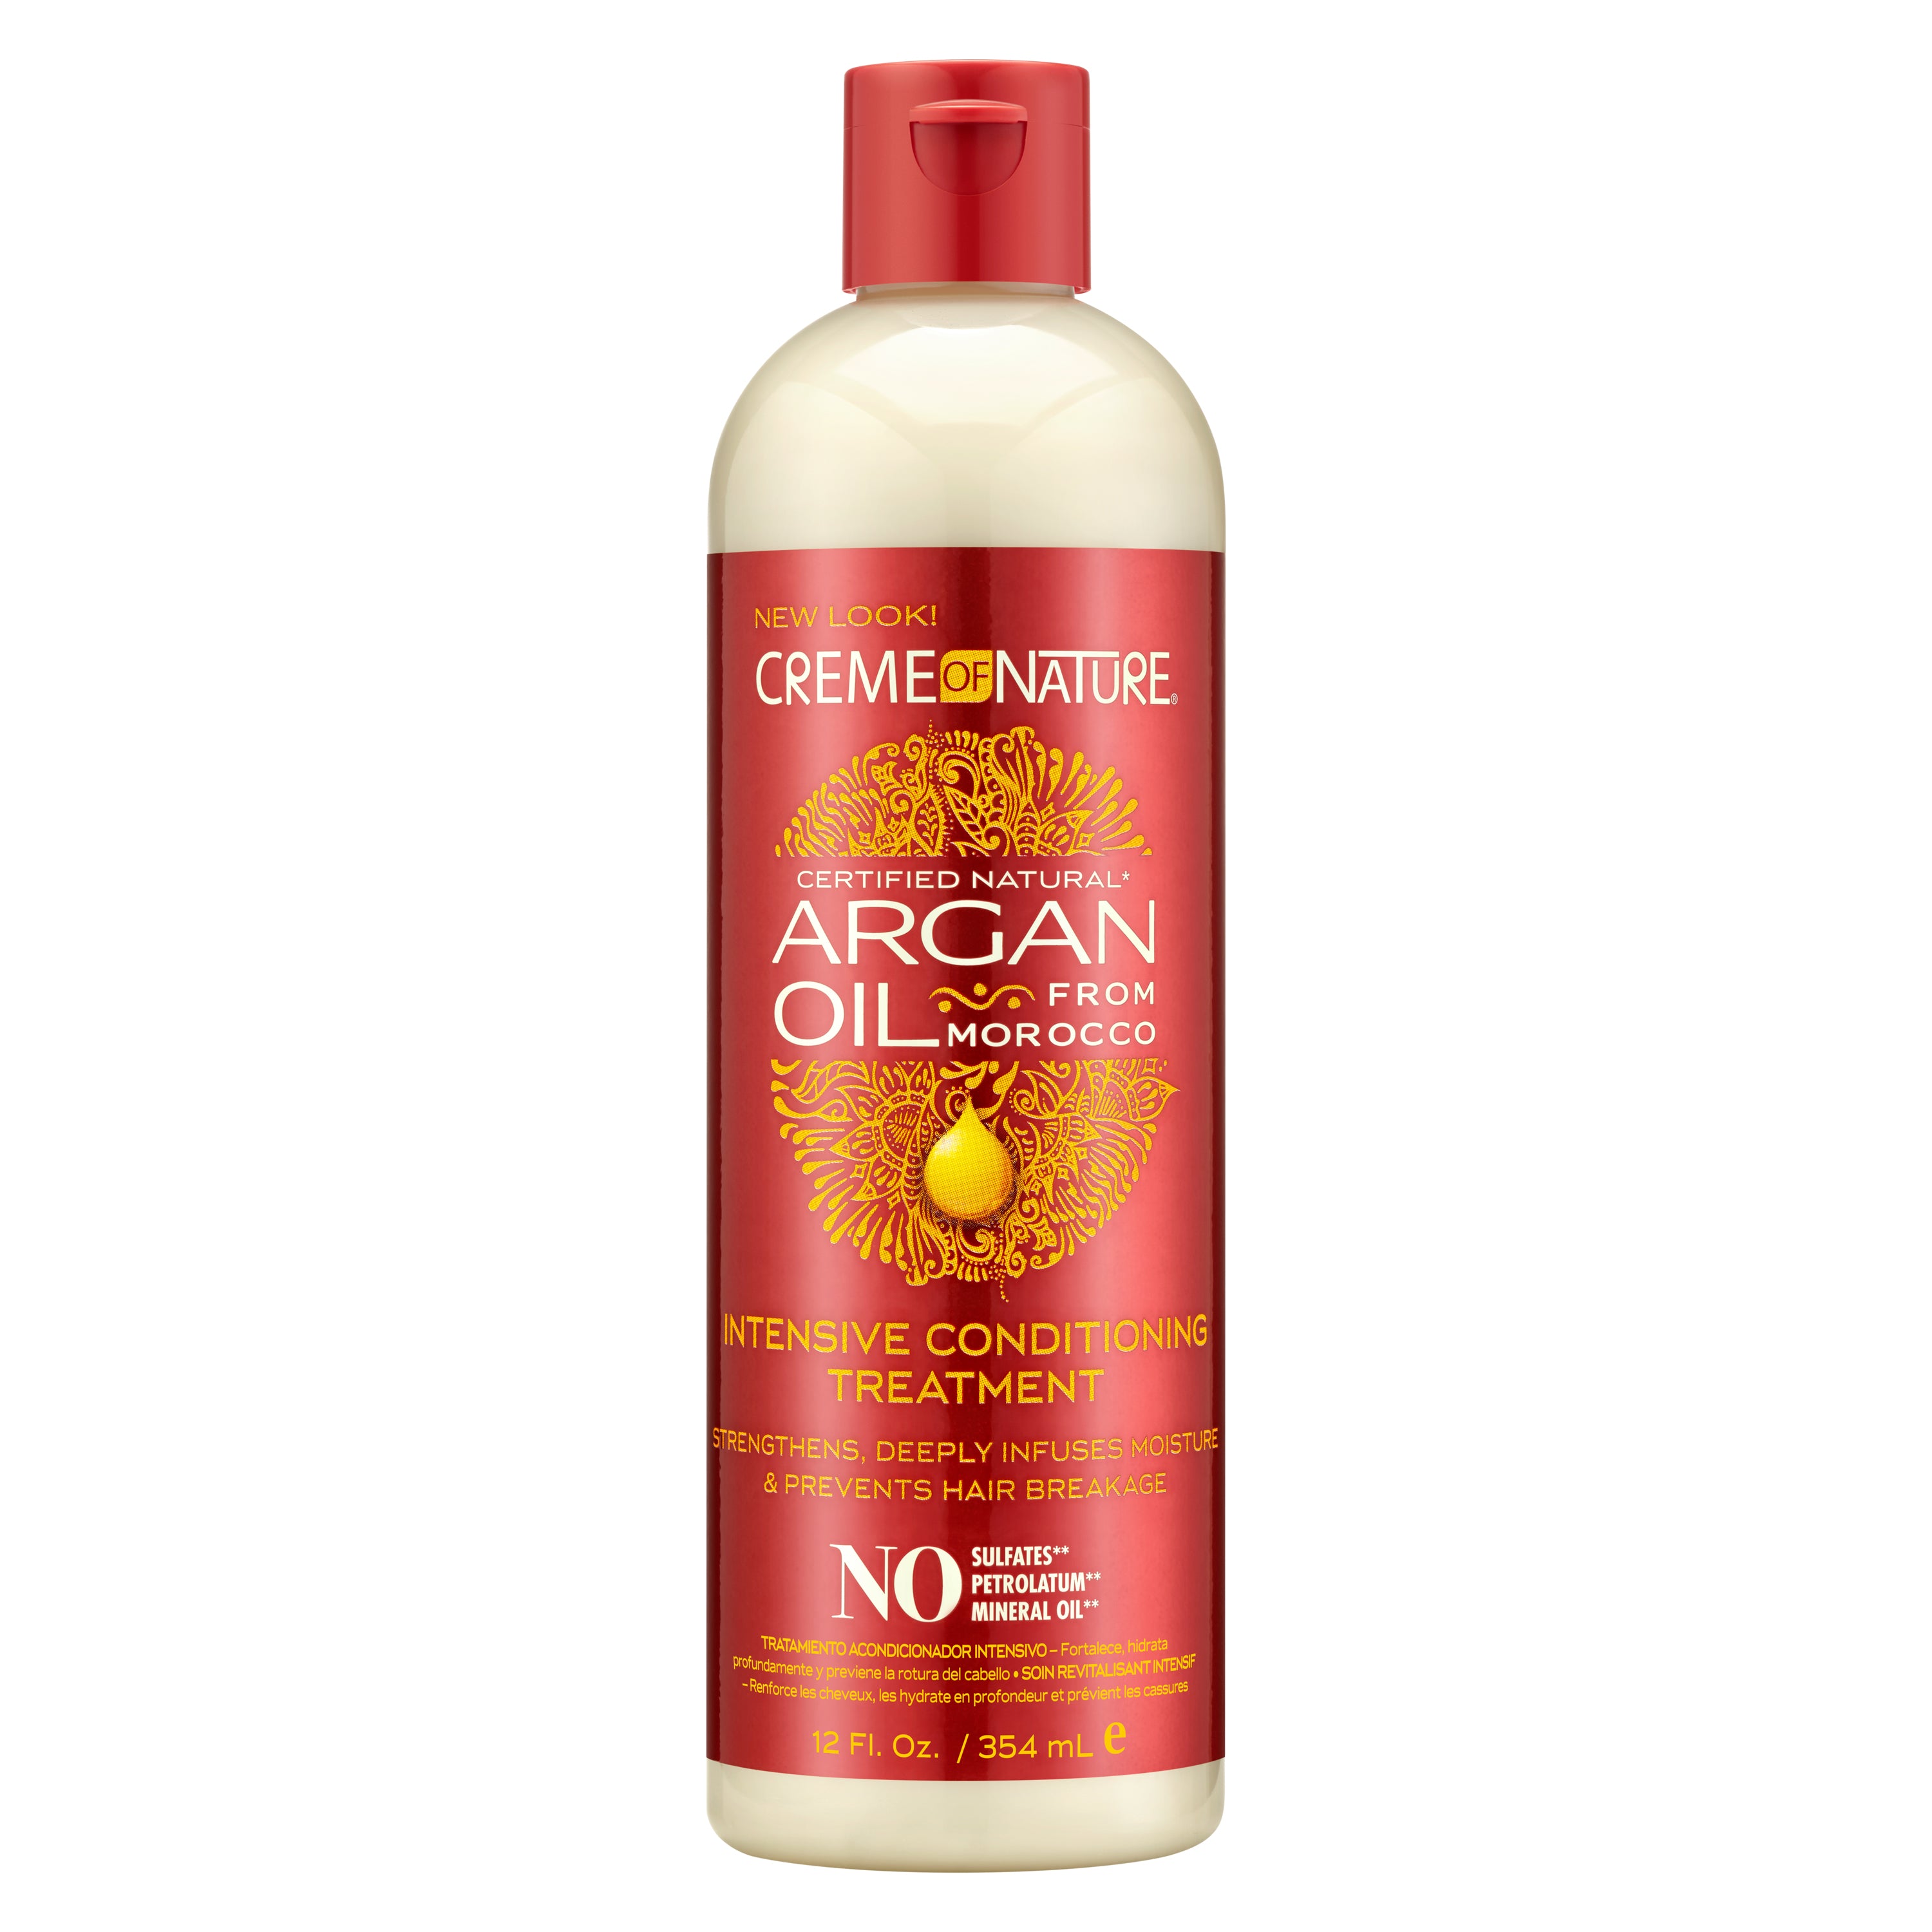 Creme of Nature Argan Oil From Morocco Intensive Conditioner Treatment 12oz